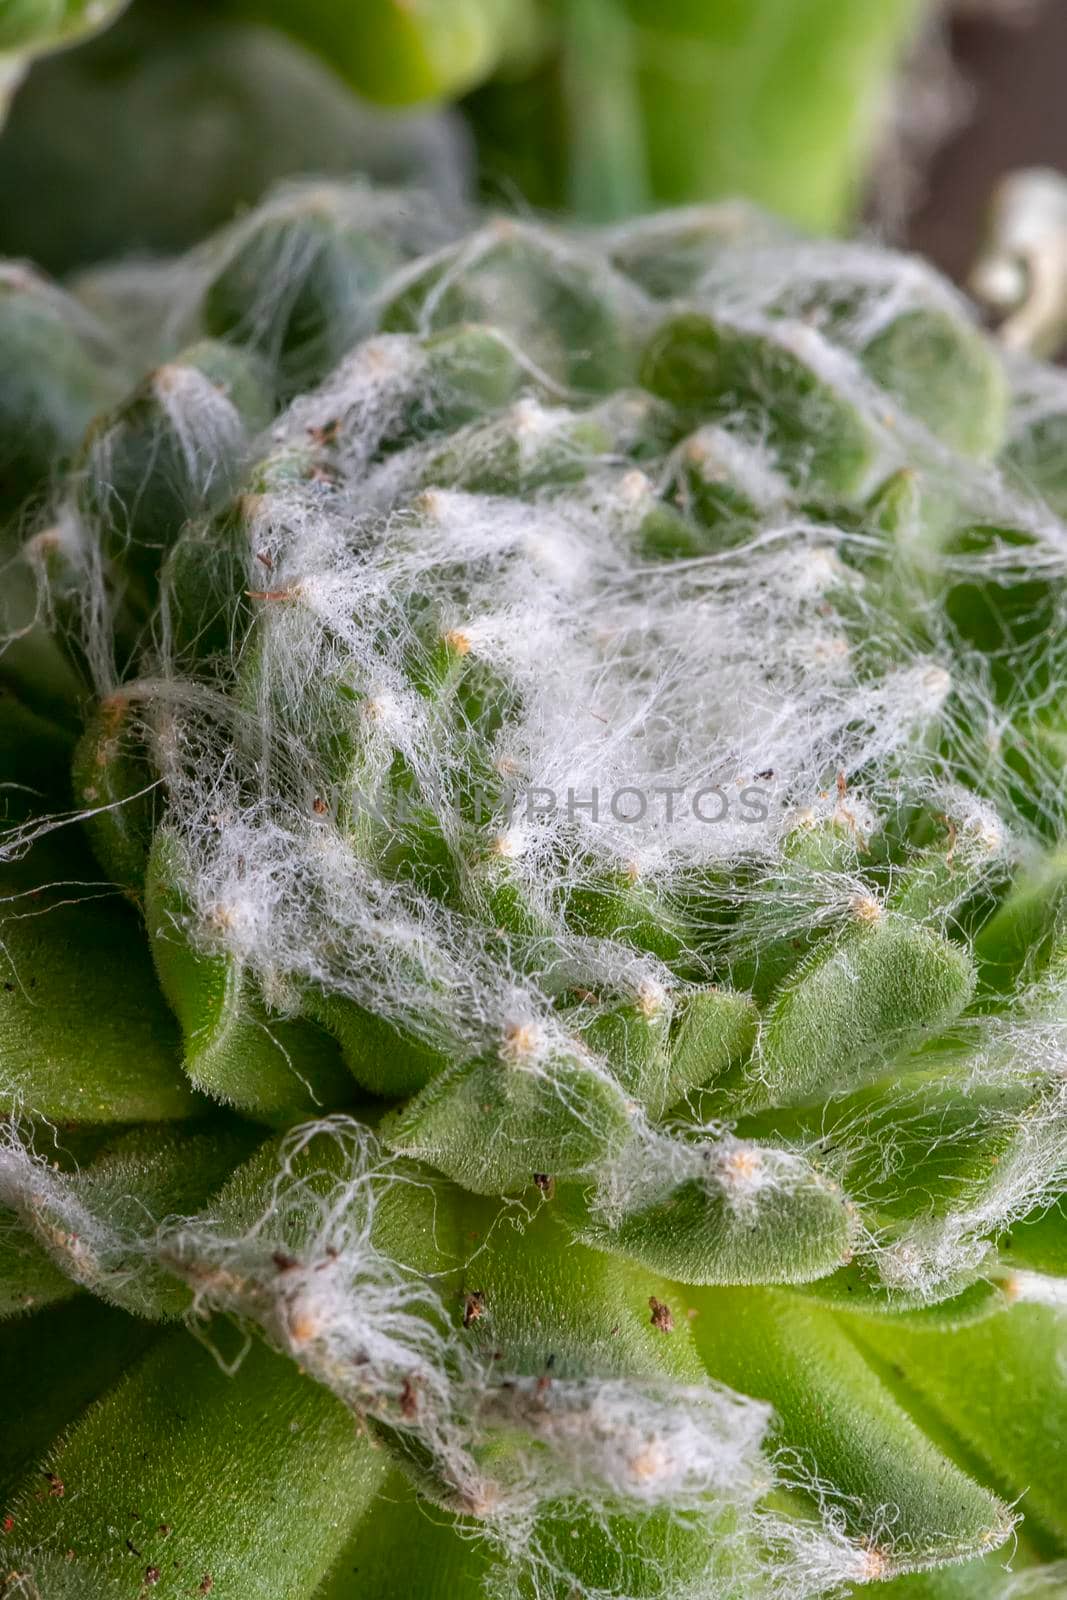 Cactus leaves, detailed close up photo, white threads between leaves visible. Vertical view by EdVal